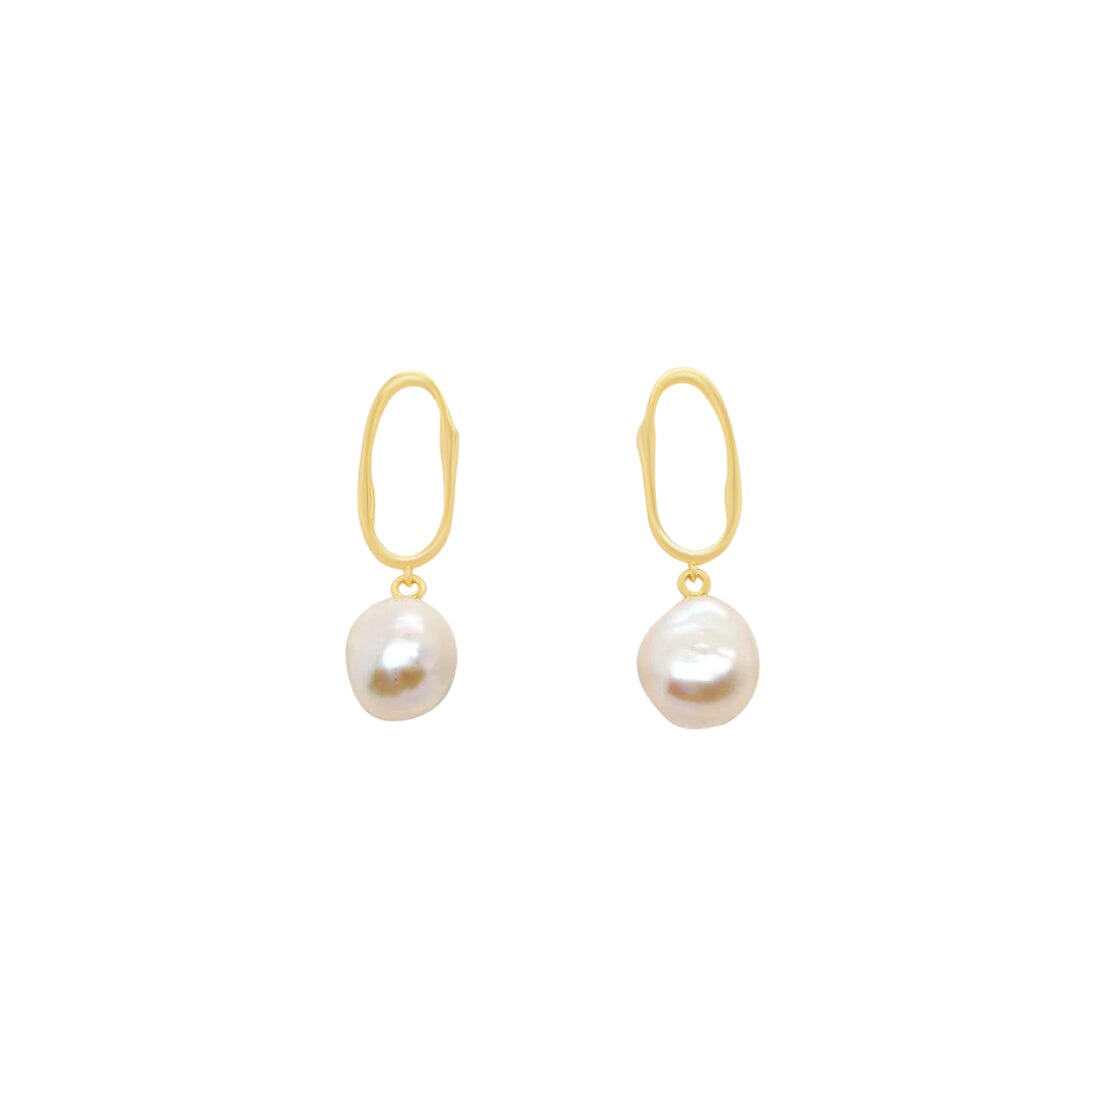 Yellow Gold Plated Baroq Drop Stud Earrings with Freshwater Pearls Earrings Bevilles 